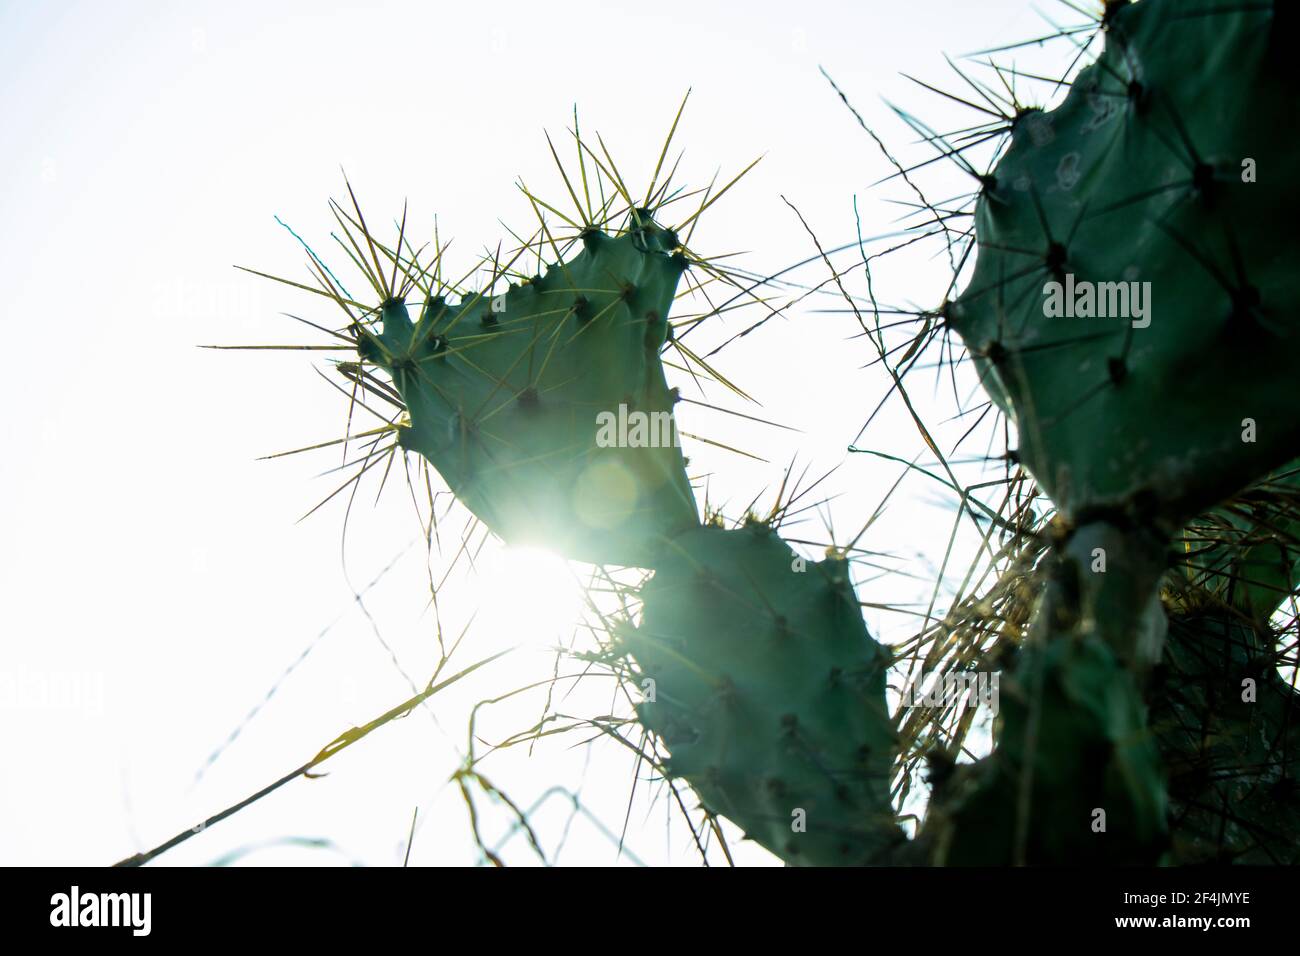 Prickly pear cactus with green fruit with sunrise background Stock Photo